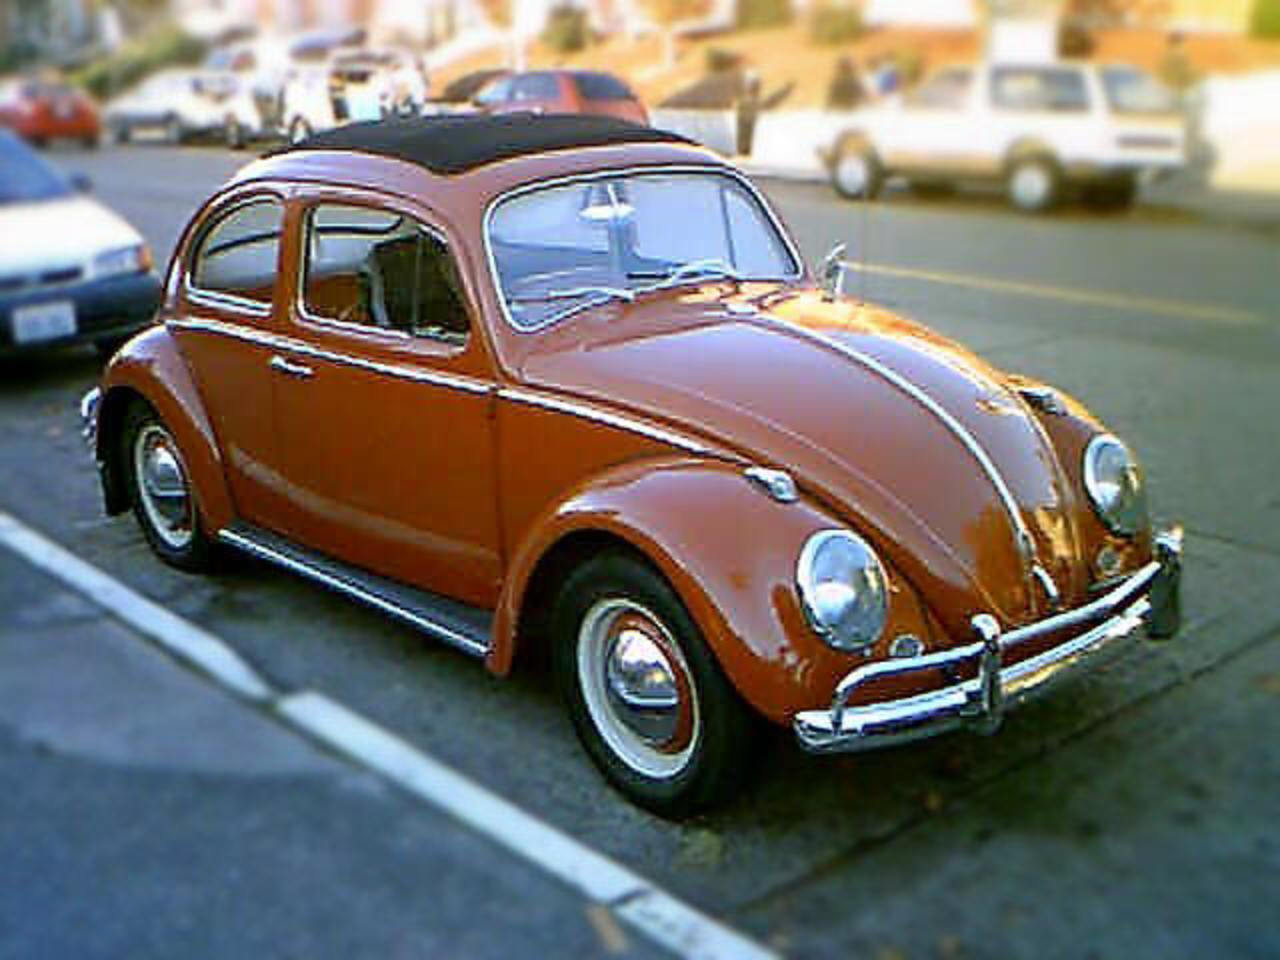 The Volkswagen Type 1, more commonly known as the Beetle, is an economy car